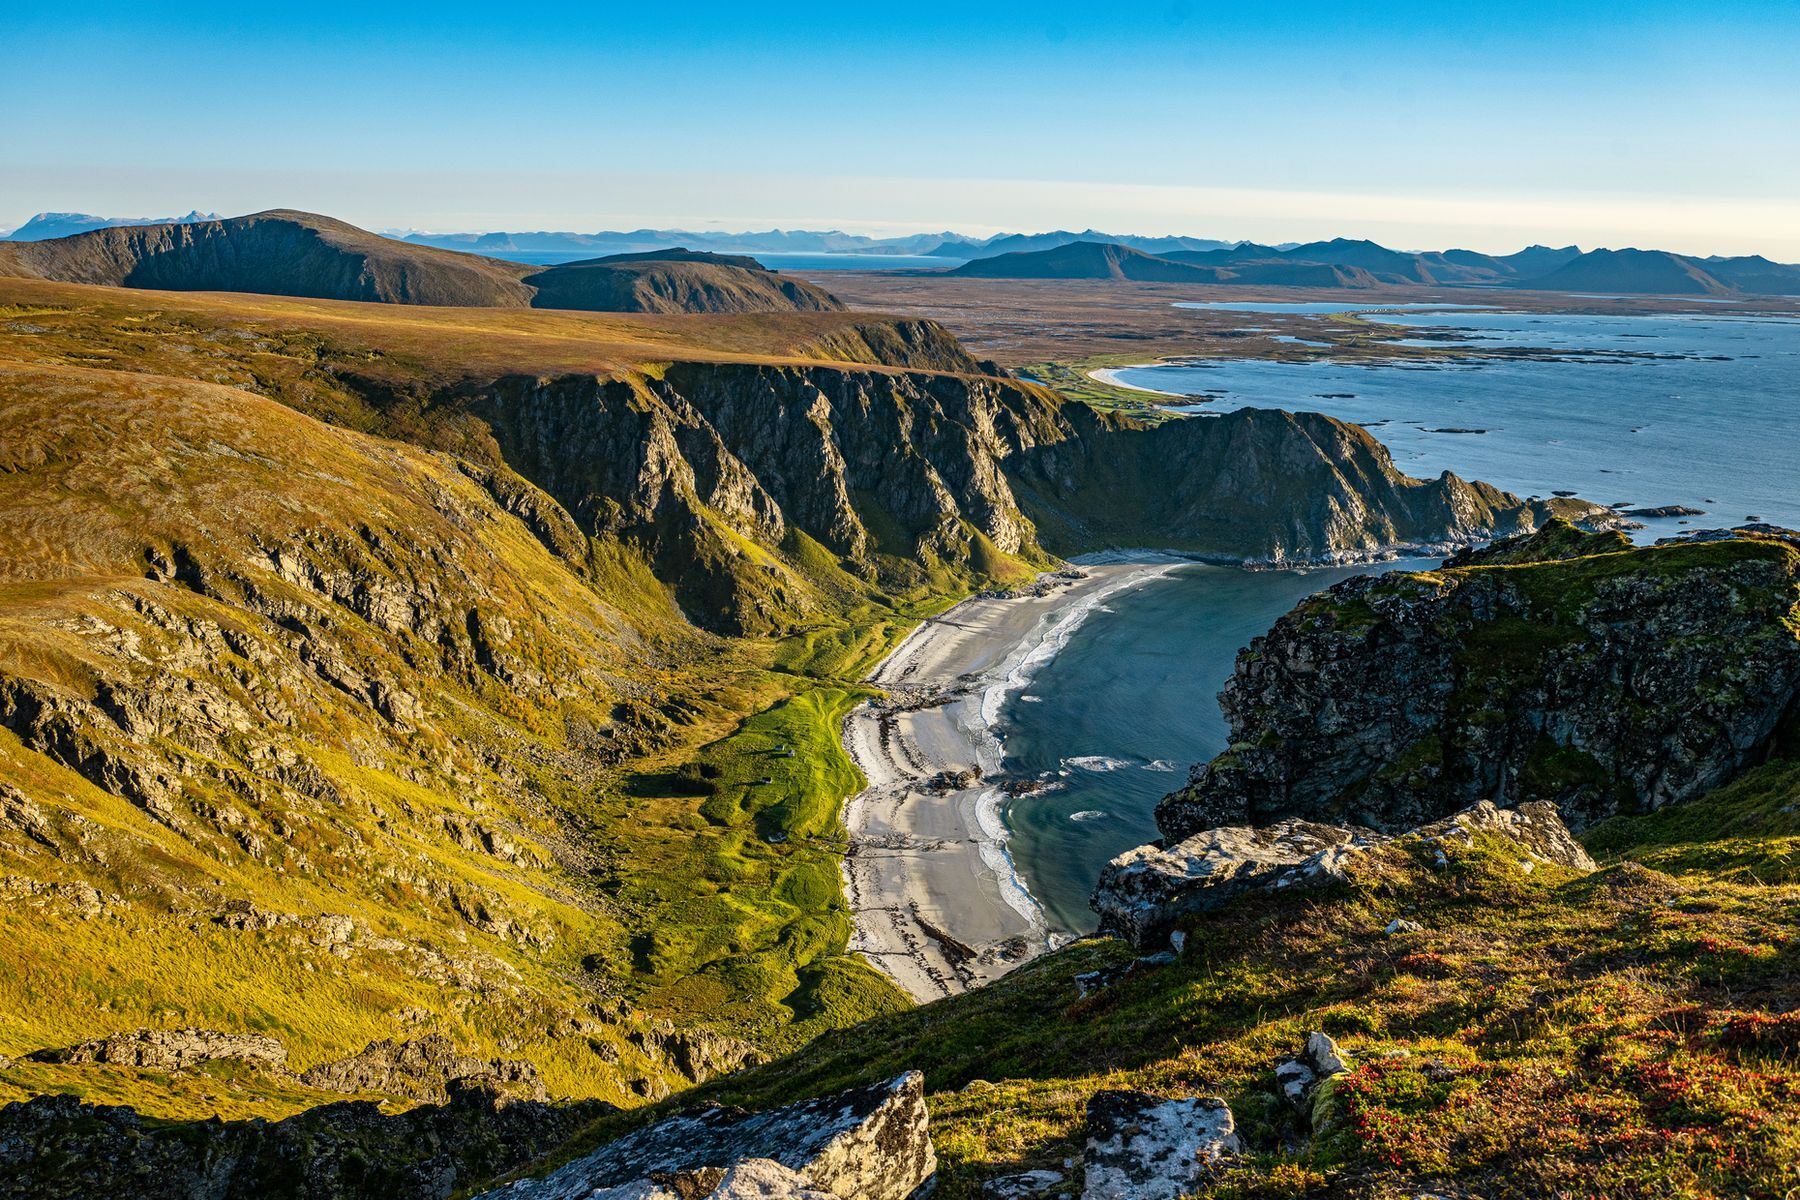 Sandy beaches, magnificent cliffs, and lush green pastures make <a href="https://www.visitnorway.com/places-to-go/northern-norway/vesteralen/andoya-scenic-route/?lang=usa" rel="noreferrer noopener">Andøya Island</a> one of Norway’s most undeniably magical places to explore. Located at the northern tip of the Vesterålen archipelago, this island boasts an abundant marine life, offering visitors the chance to see whales, orcas, and seabirds in their natural habitat. Whether drawn by Andøya’s idyllic setting or peaceful ambiance, travellers should shoot for between May and August to enjoy its pleasant climate and outdoor activities.